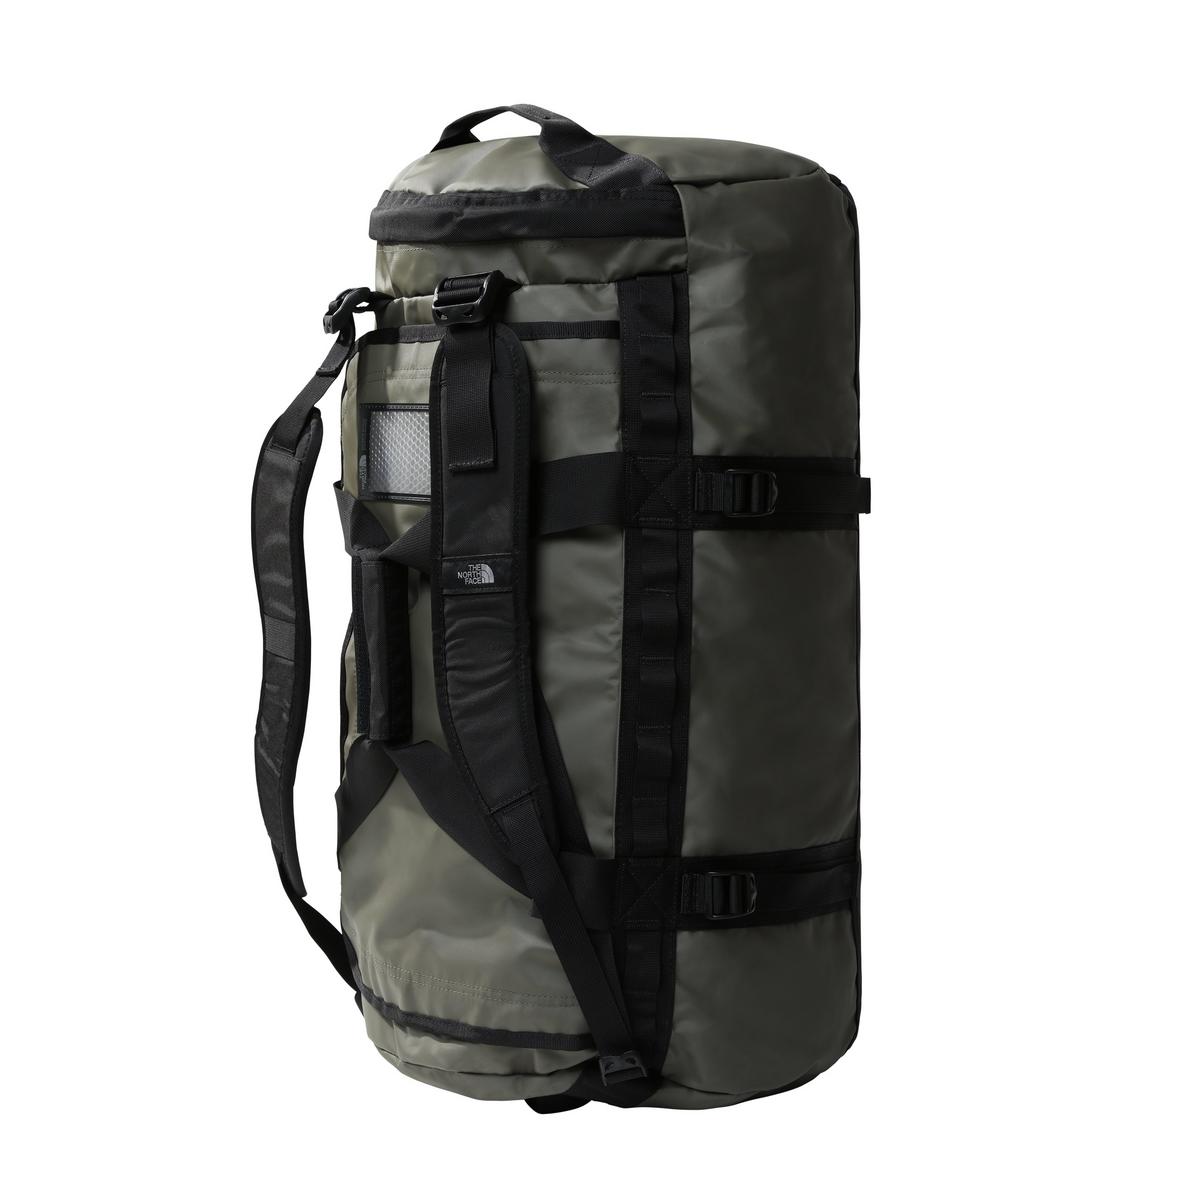 The North Face Base Camp 71L Duffel - Taupe Green